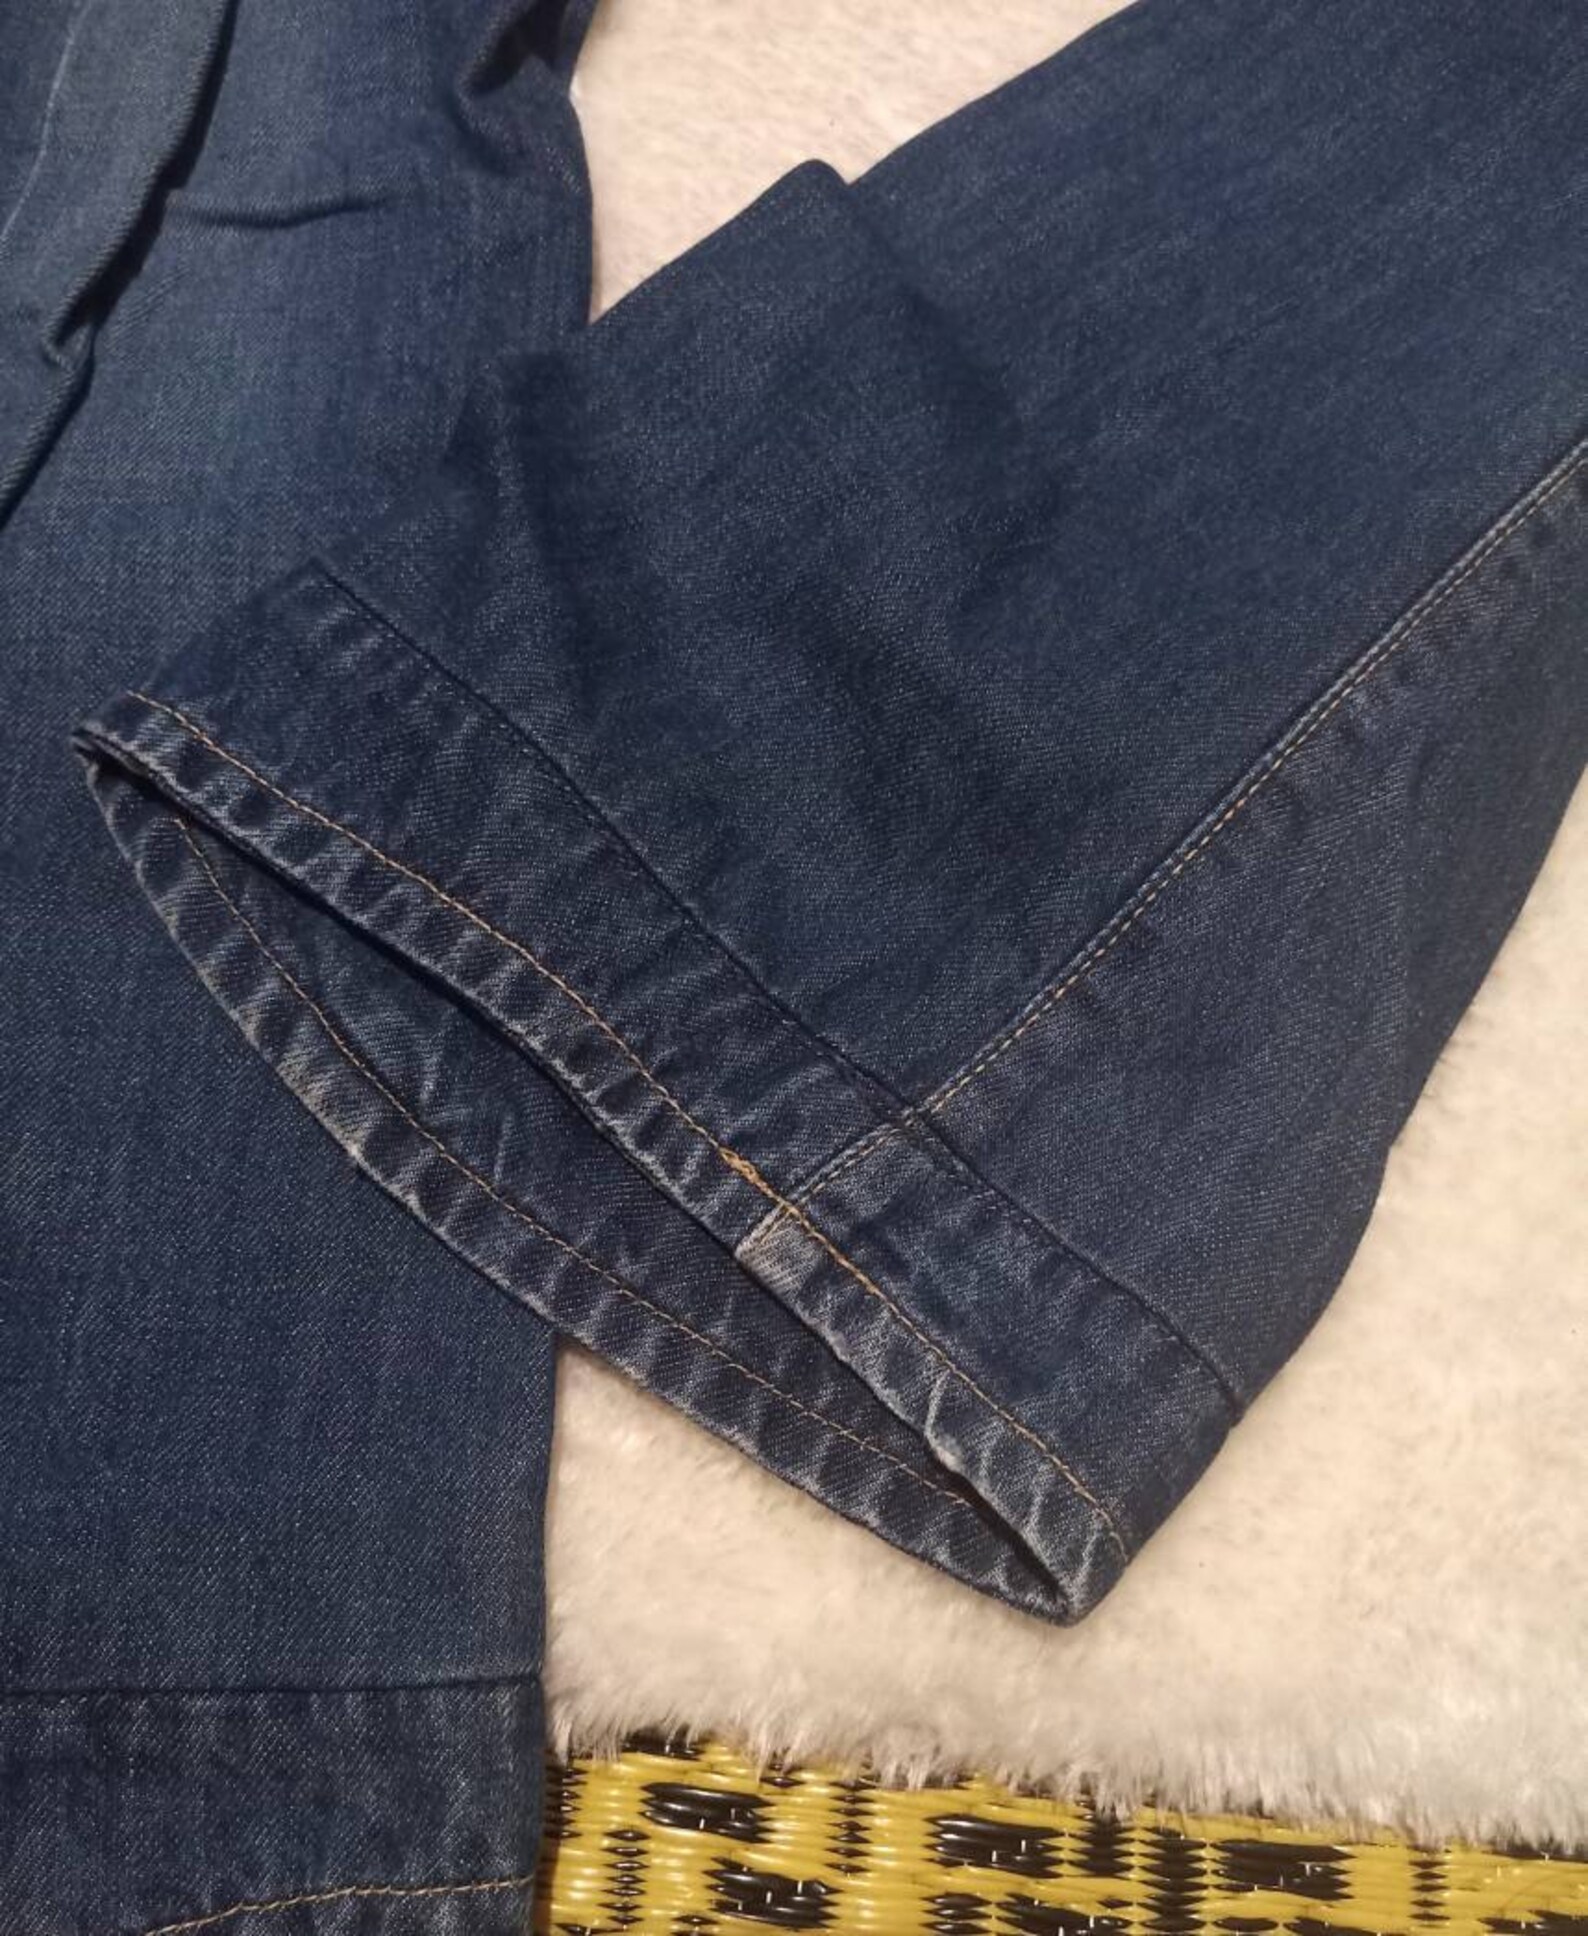 Vintage Levi Jeans Engineered Twisted Model W30 shortened and | Etsy